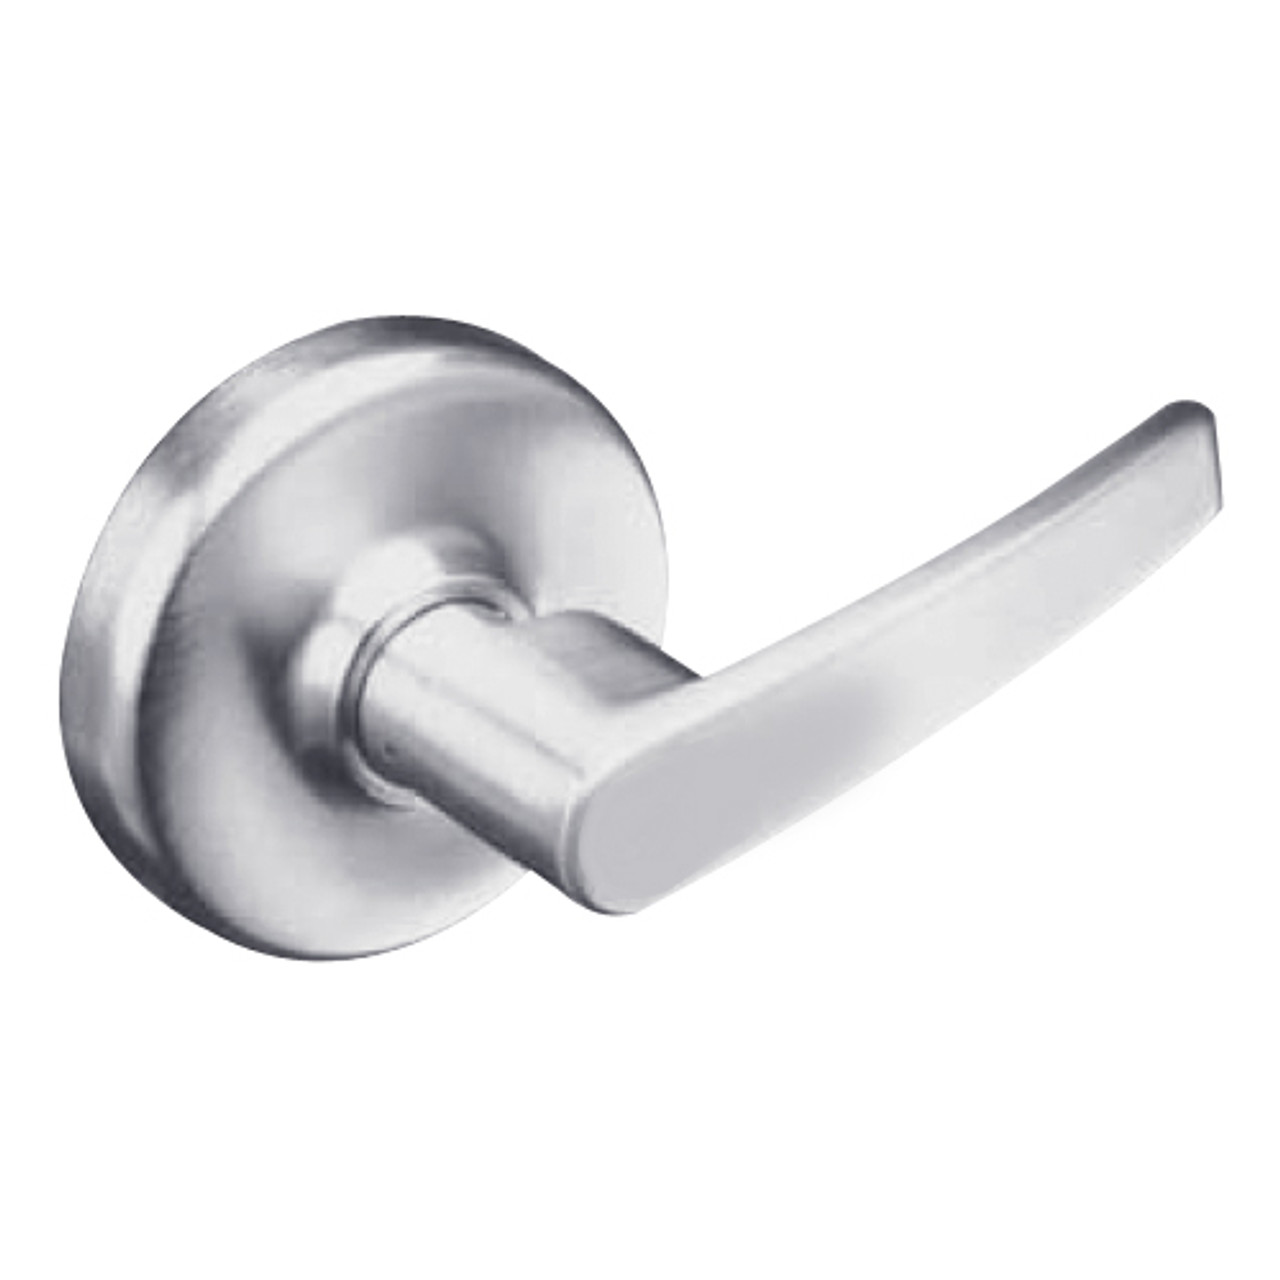 CL3170-AZD-626 Corbin CL3100 Series Vandal Resistant Full Dummy Cylindrical Locksets with Armstrong Lever in Satin Chrome Finish